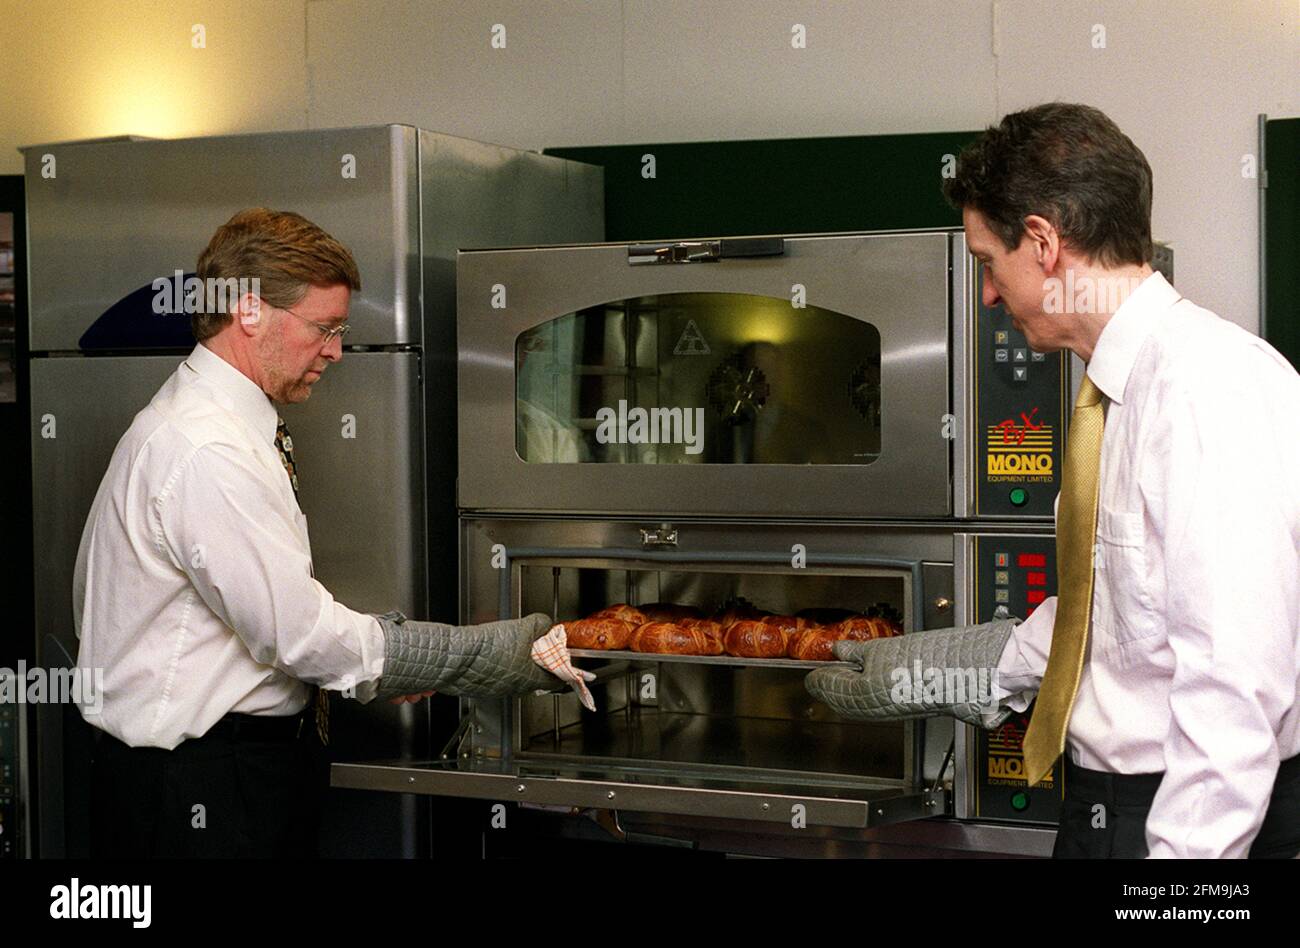 AGA Foodservices Group PLC Photocall March 2001 LEFT Stephen Rennie Chief Operating Officer and  RIGHT William McGrath Chief Executive use one of their ovens Stock Photo